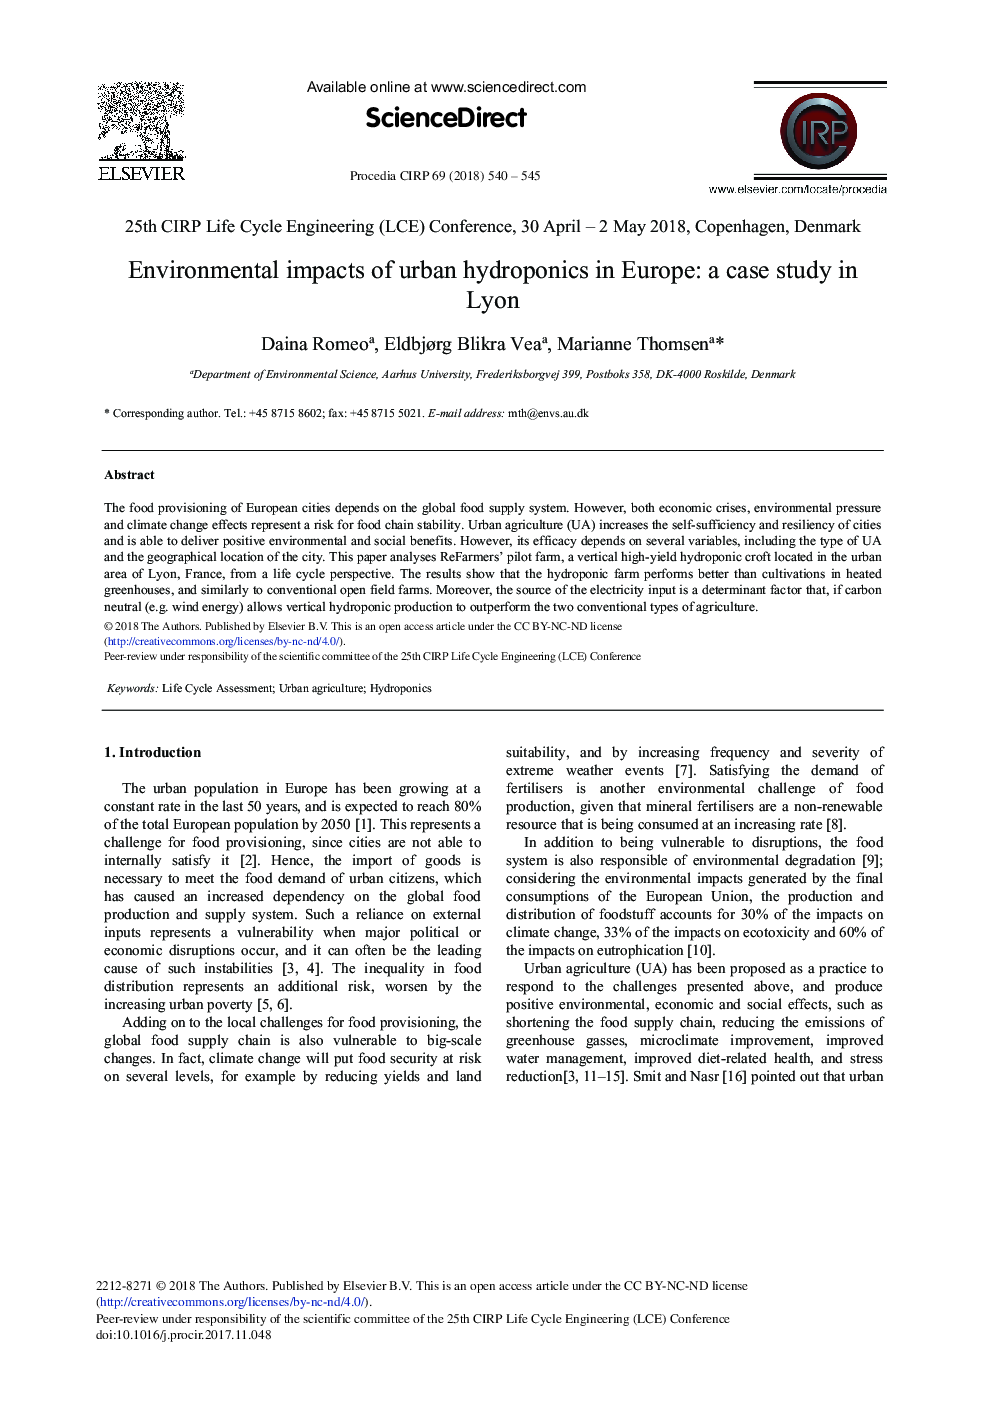 Environmental Impacts of Urban Hydroponics in Europe: A Case Study in Lyon